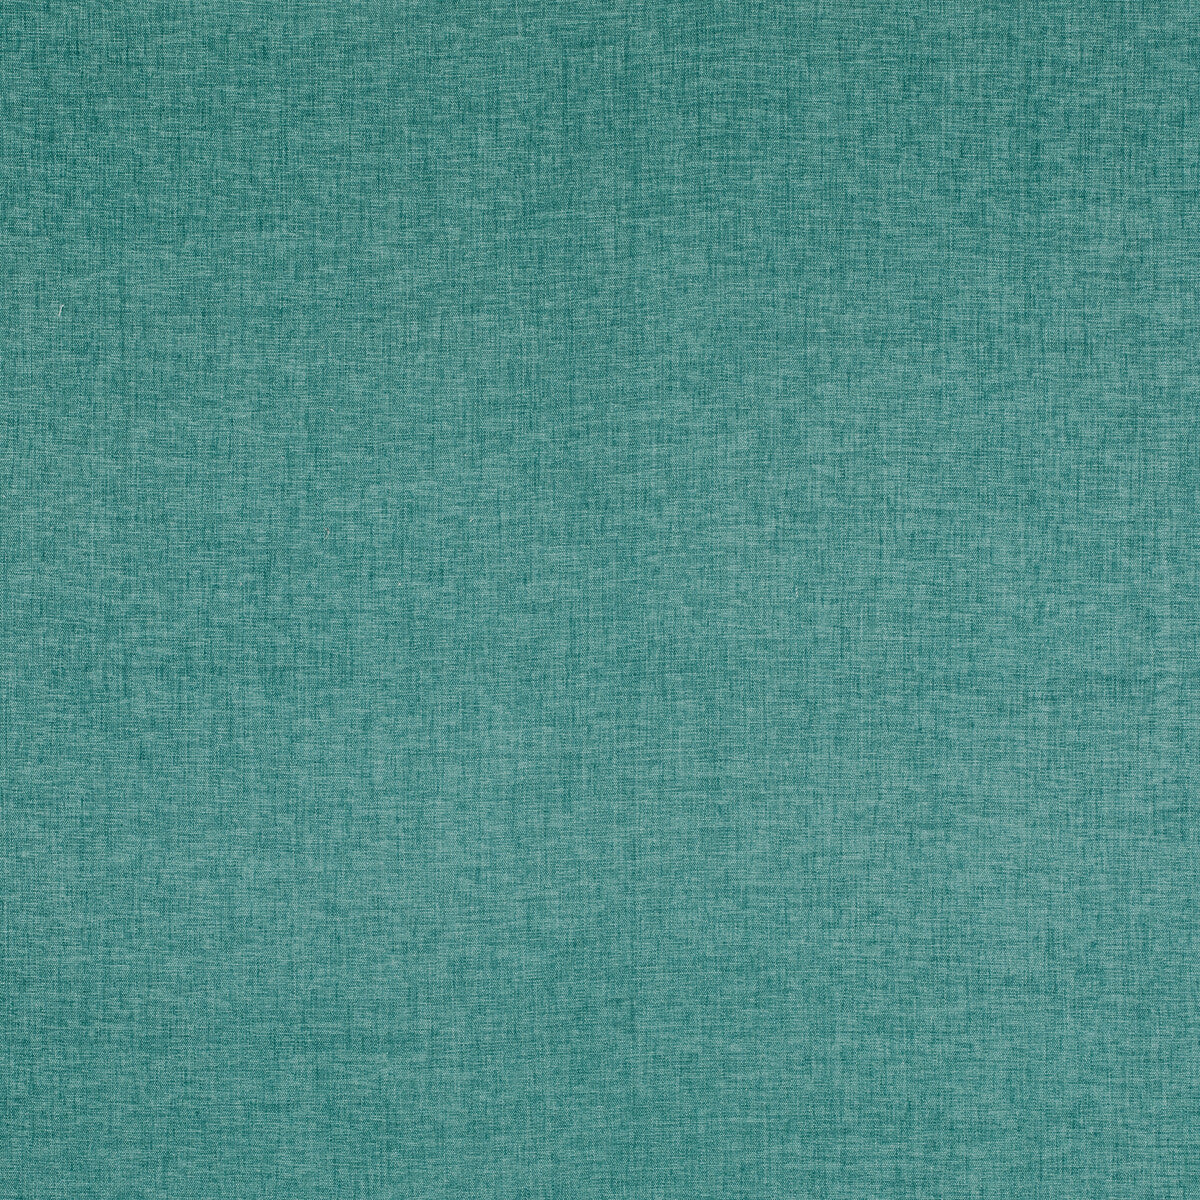 Kravet Smart fabric in 36095-13 color - pattern 36095.13.0 - by Kravet Smart in the Eco-Friendly Chenille collection